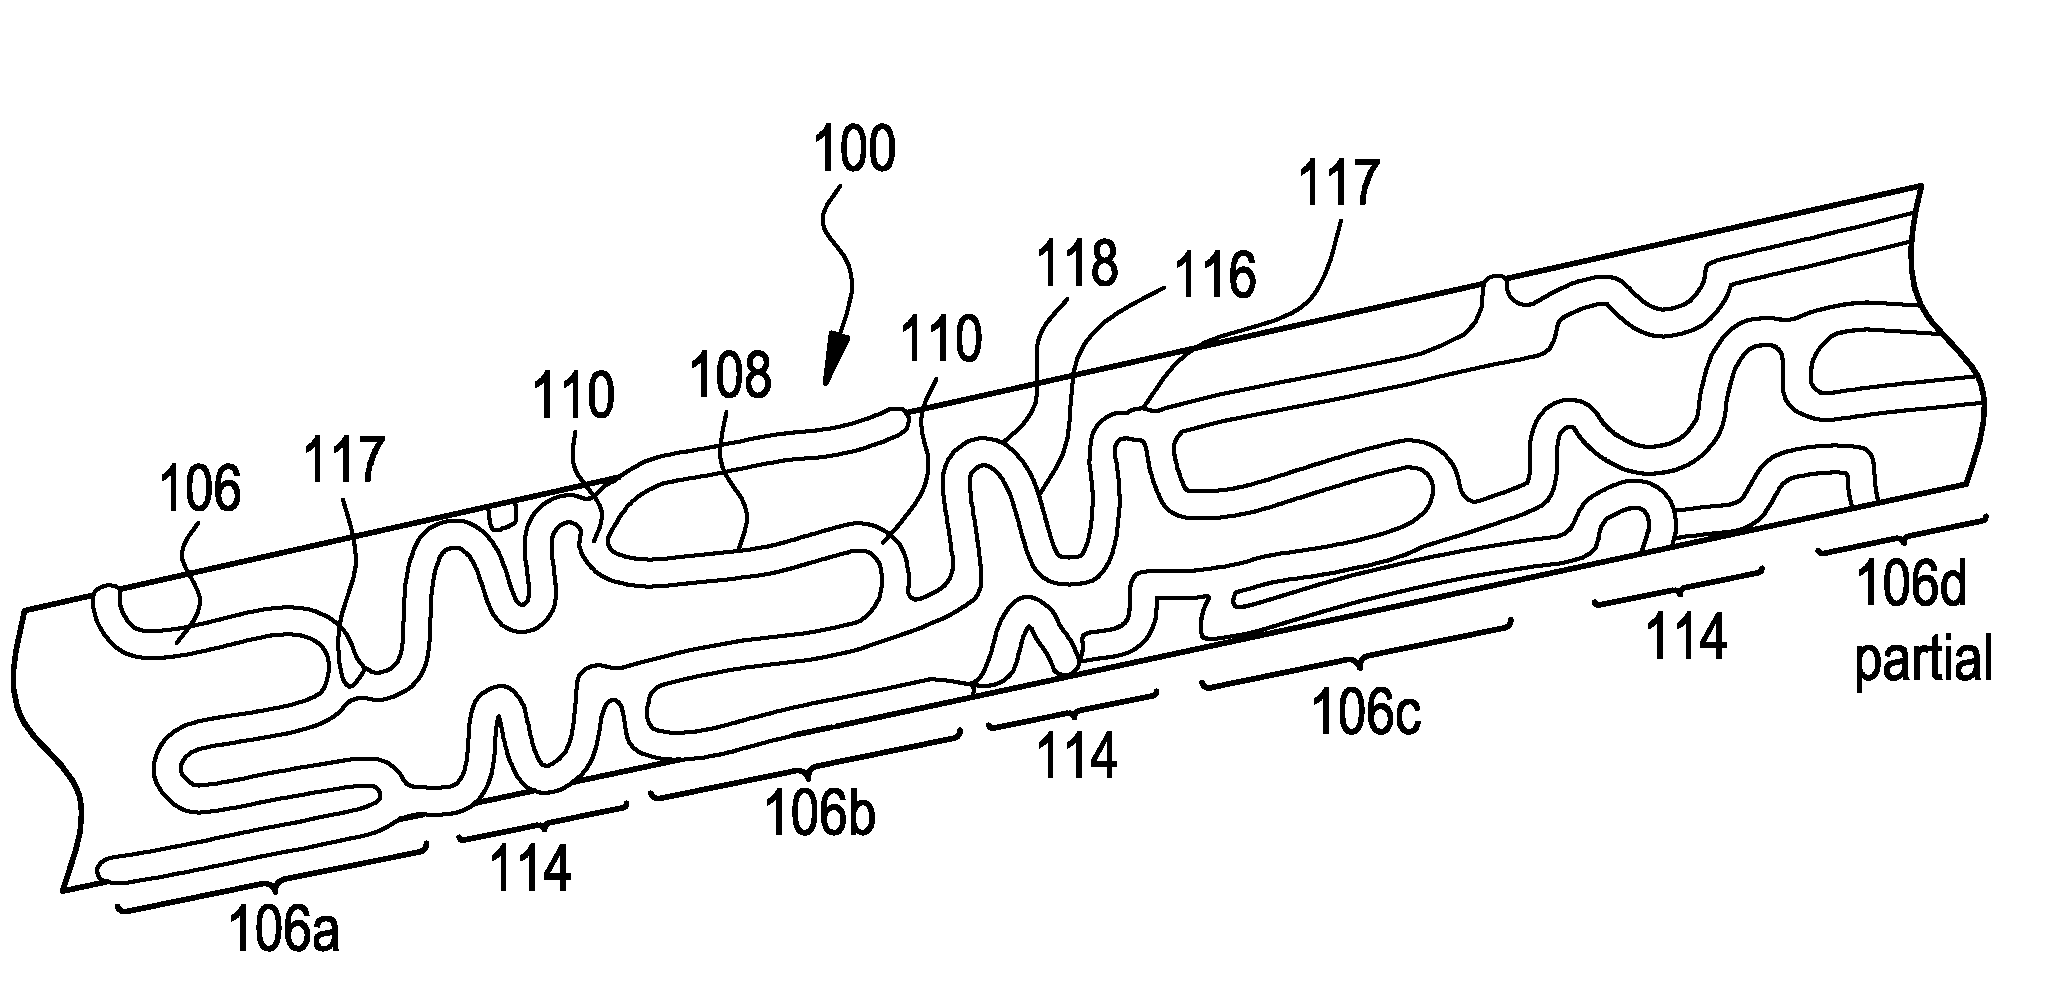 Intraluminal medical device having variable axial flexibility about the circumference of the device